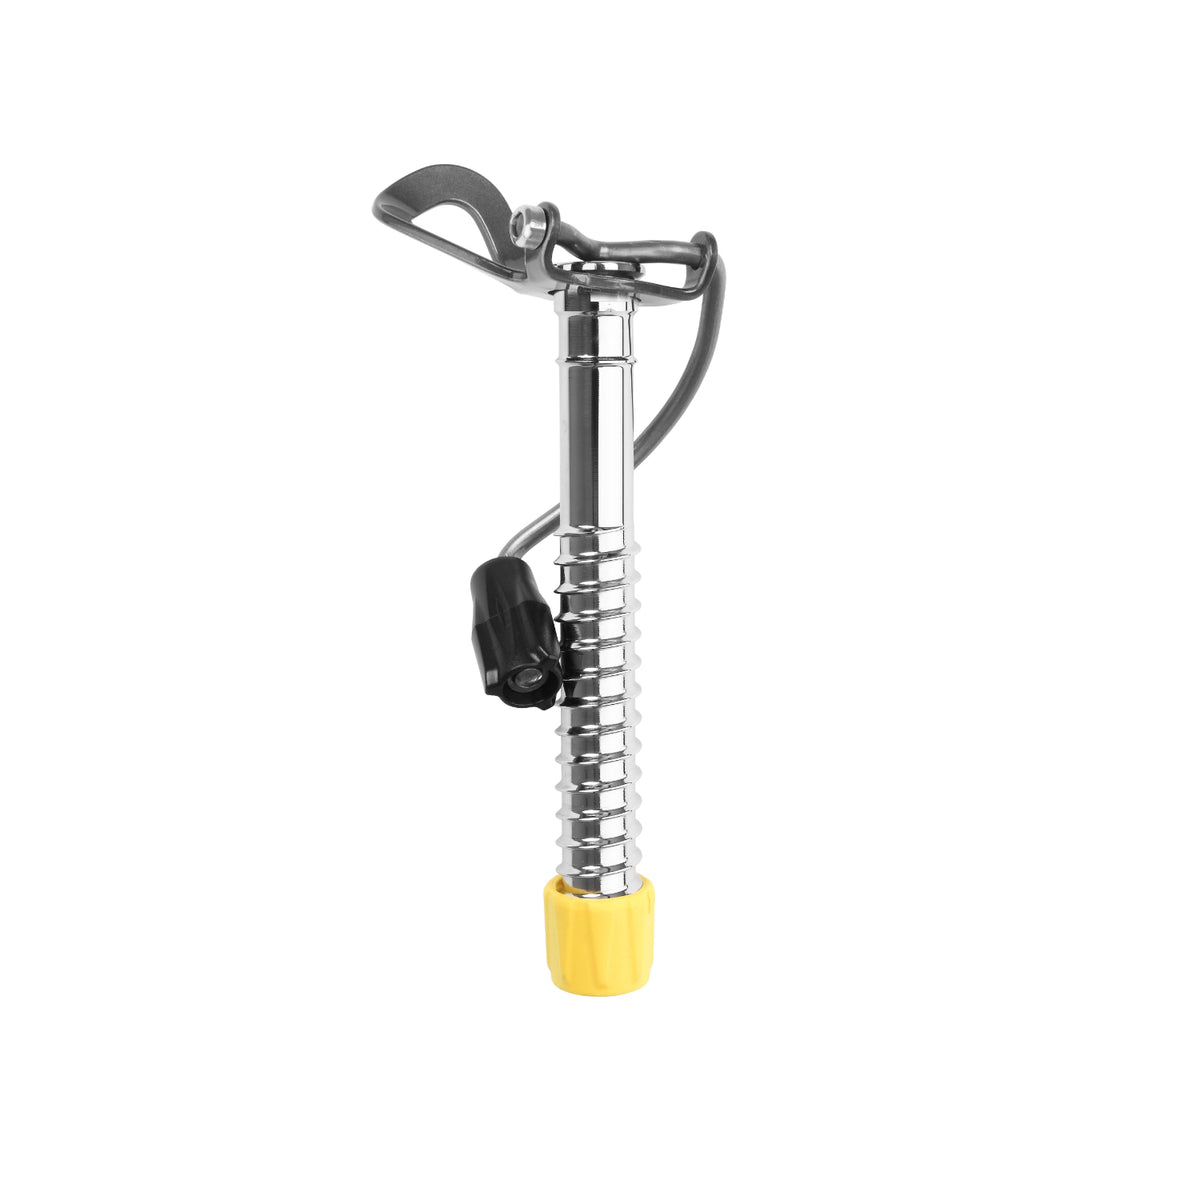 Grivel 360 Ice Screw Medium, with silver shaft and black tag